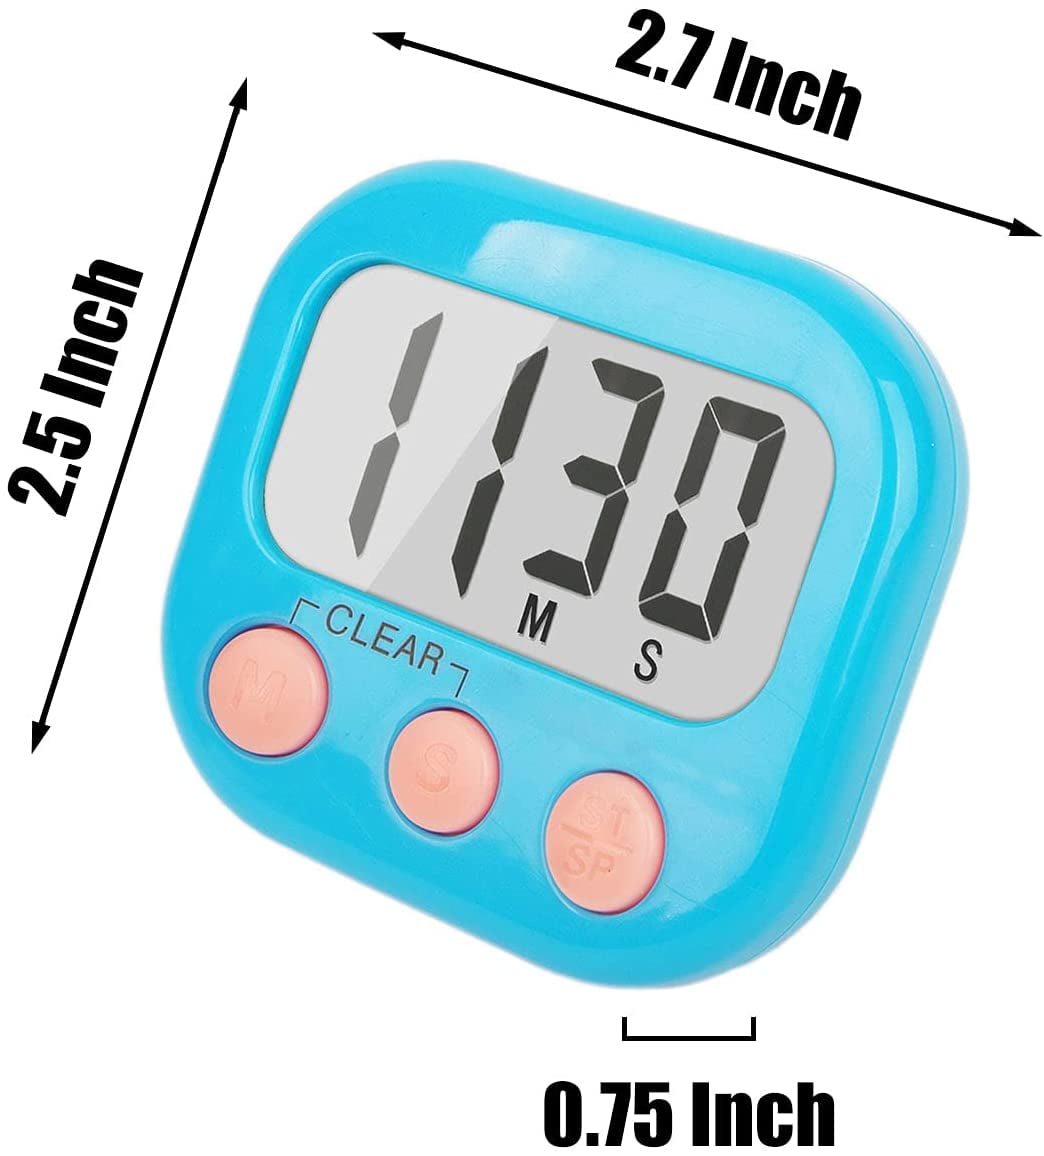 AllTopBargains 1 Digital Kitchen Timer Magnetic Cooking LCD Large Count Down Clear Loud Alarm